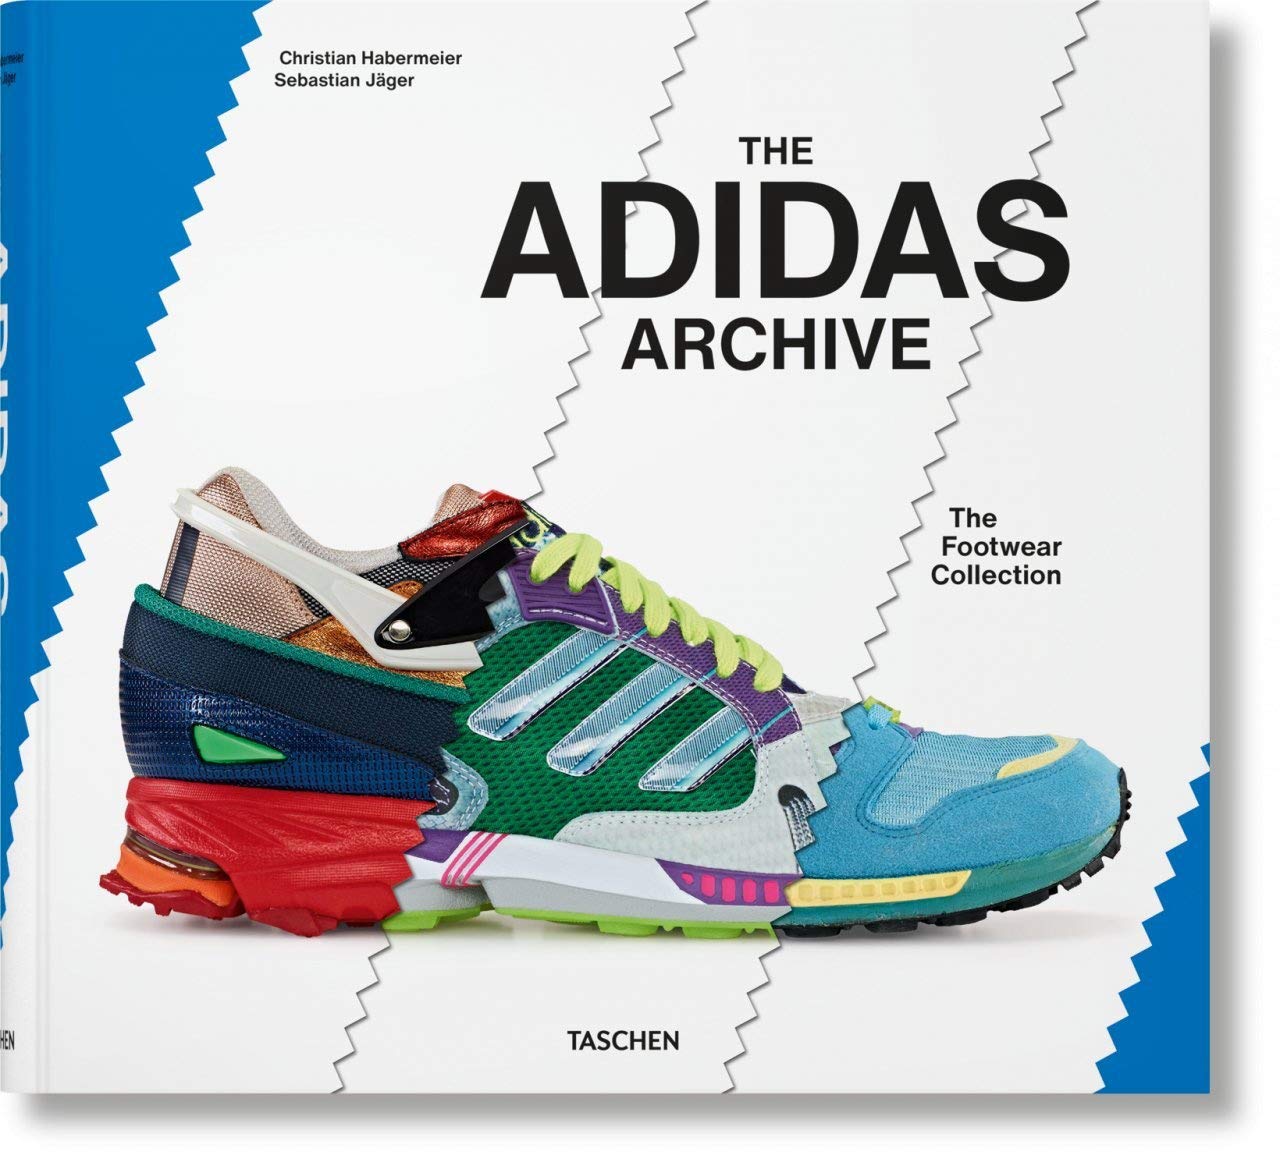 The Adidas Archive // the Footwear Collection